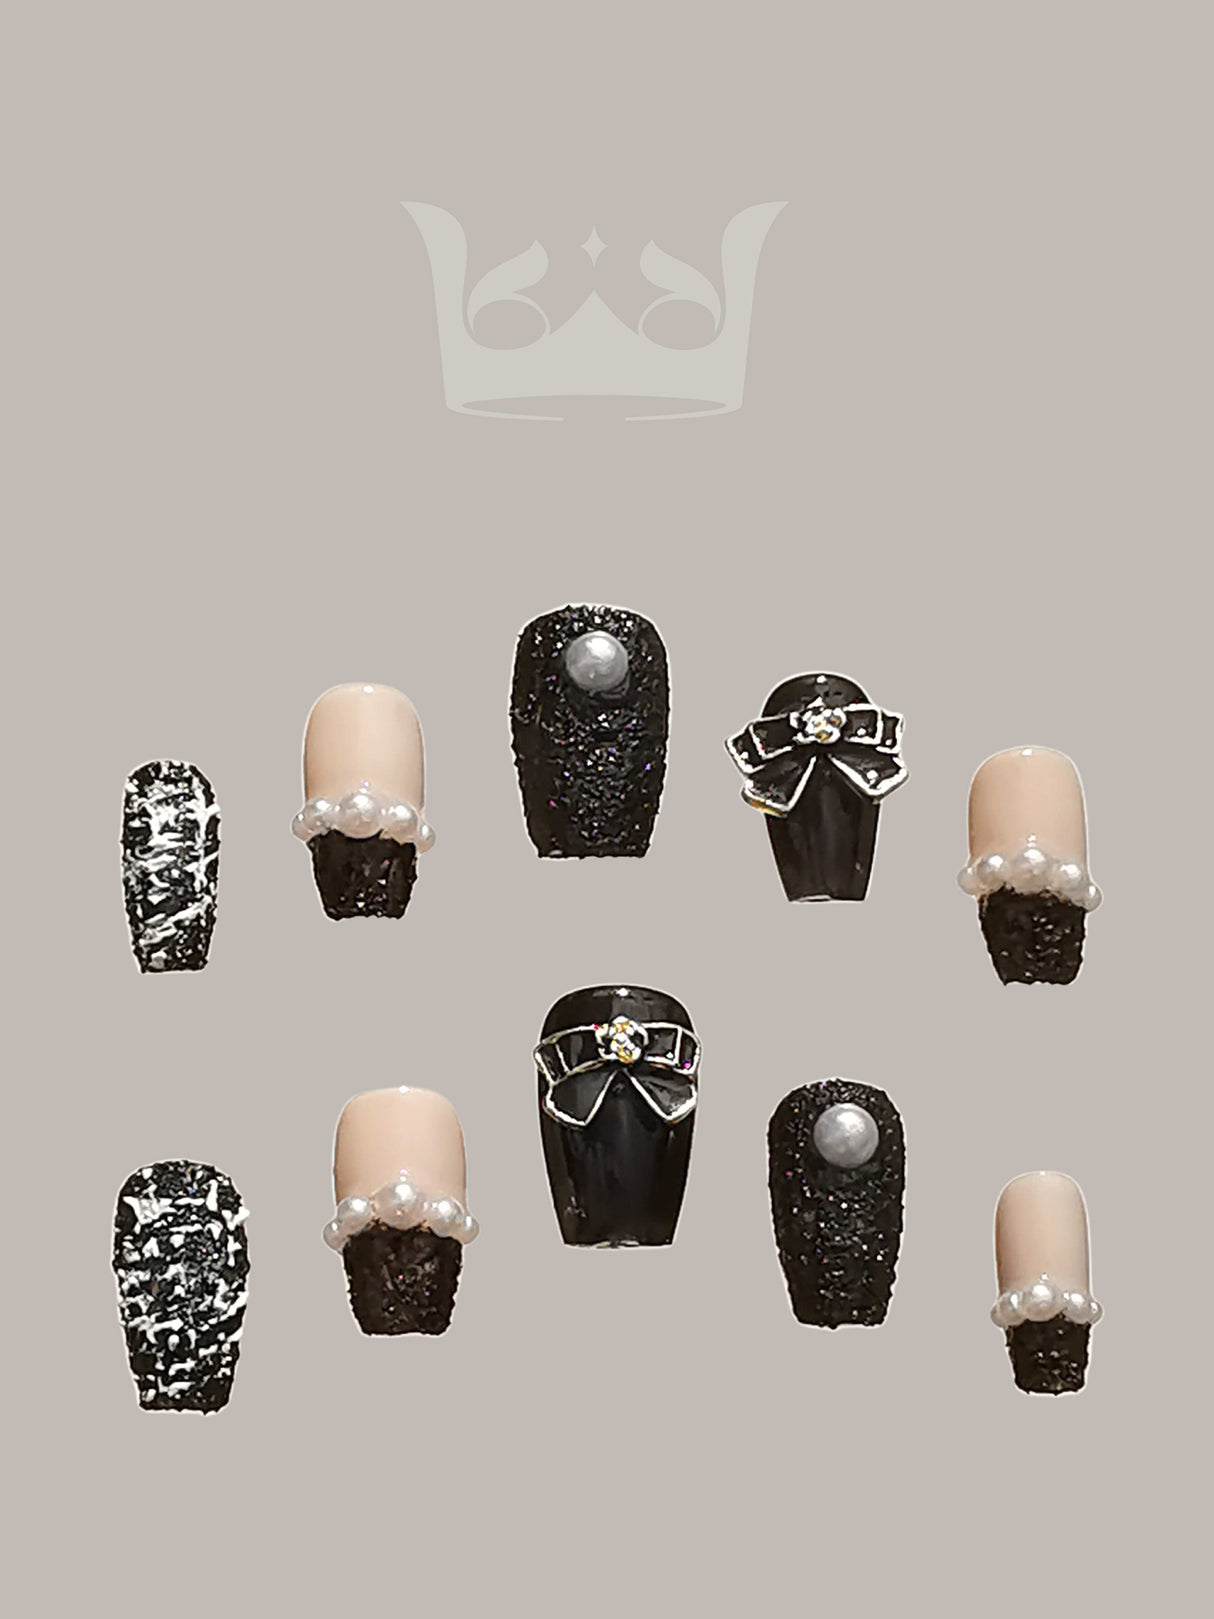 These press-on nails featuring a neutral base with textured black overlay, pearls, metallic accents, and 3D elements. The symmetrical design creates a luxurious and bold aesthetic.